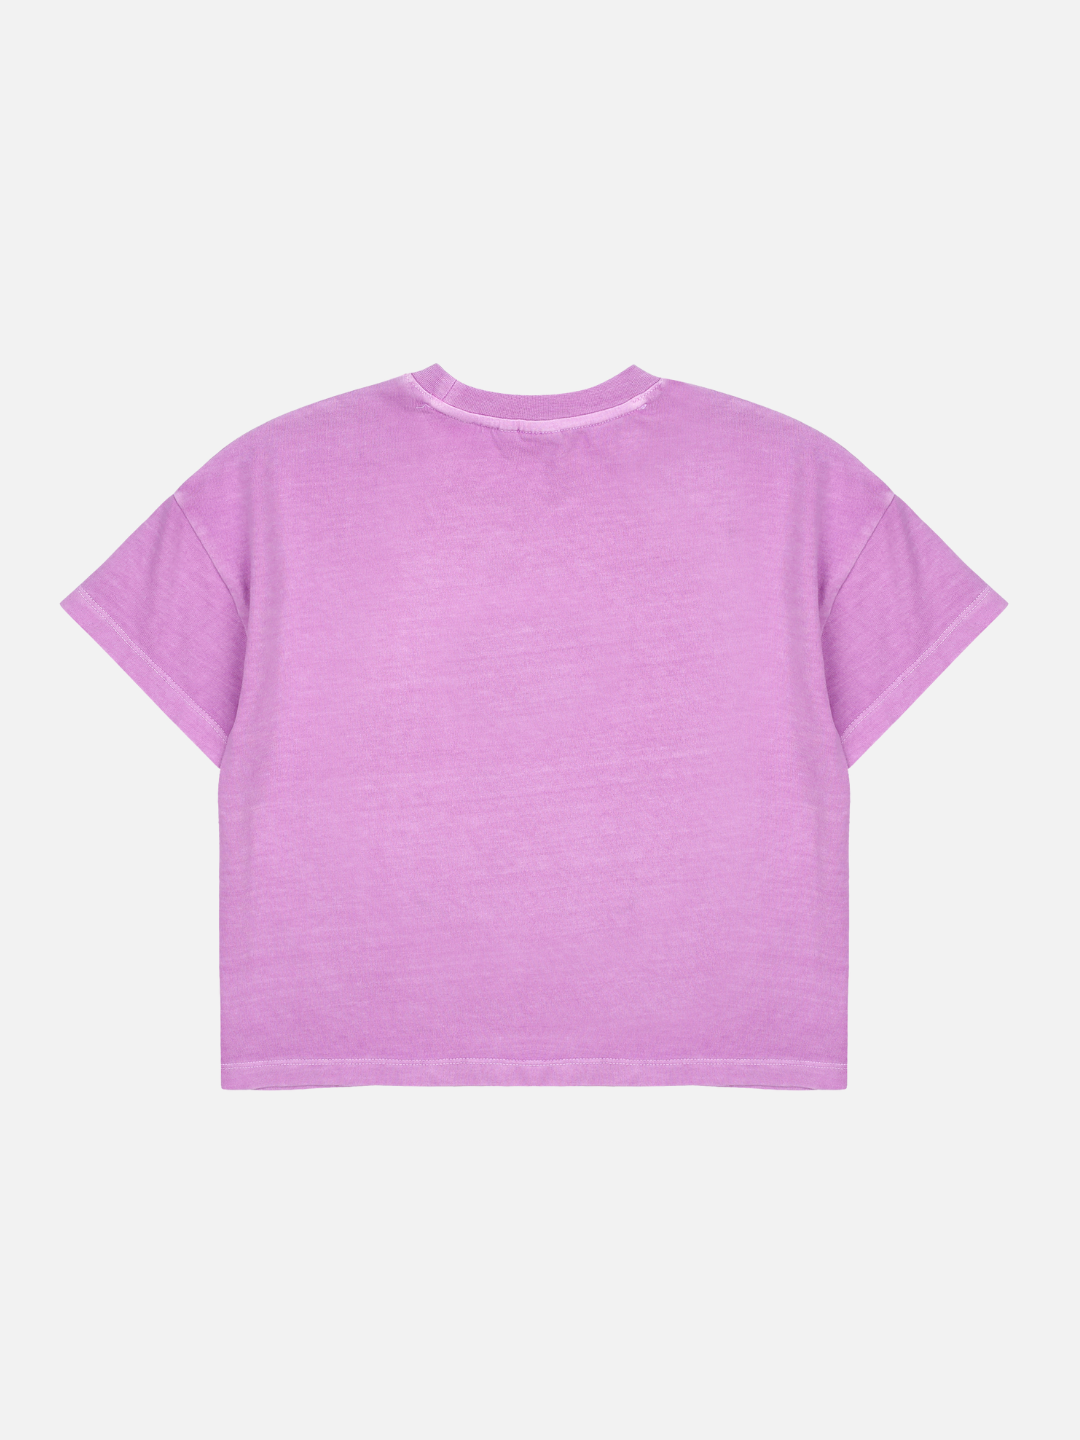 Purple | Back of T-shirt with no design and a light purple background.